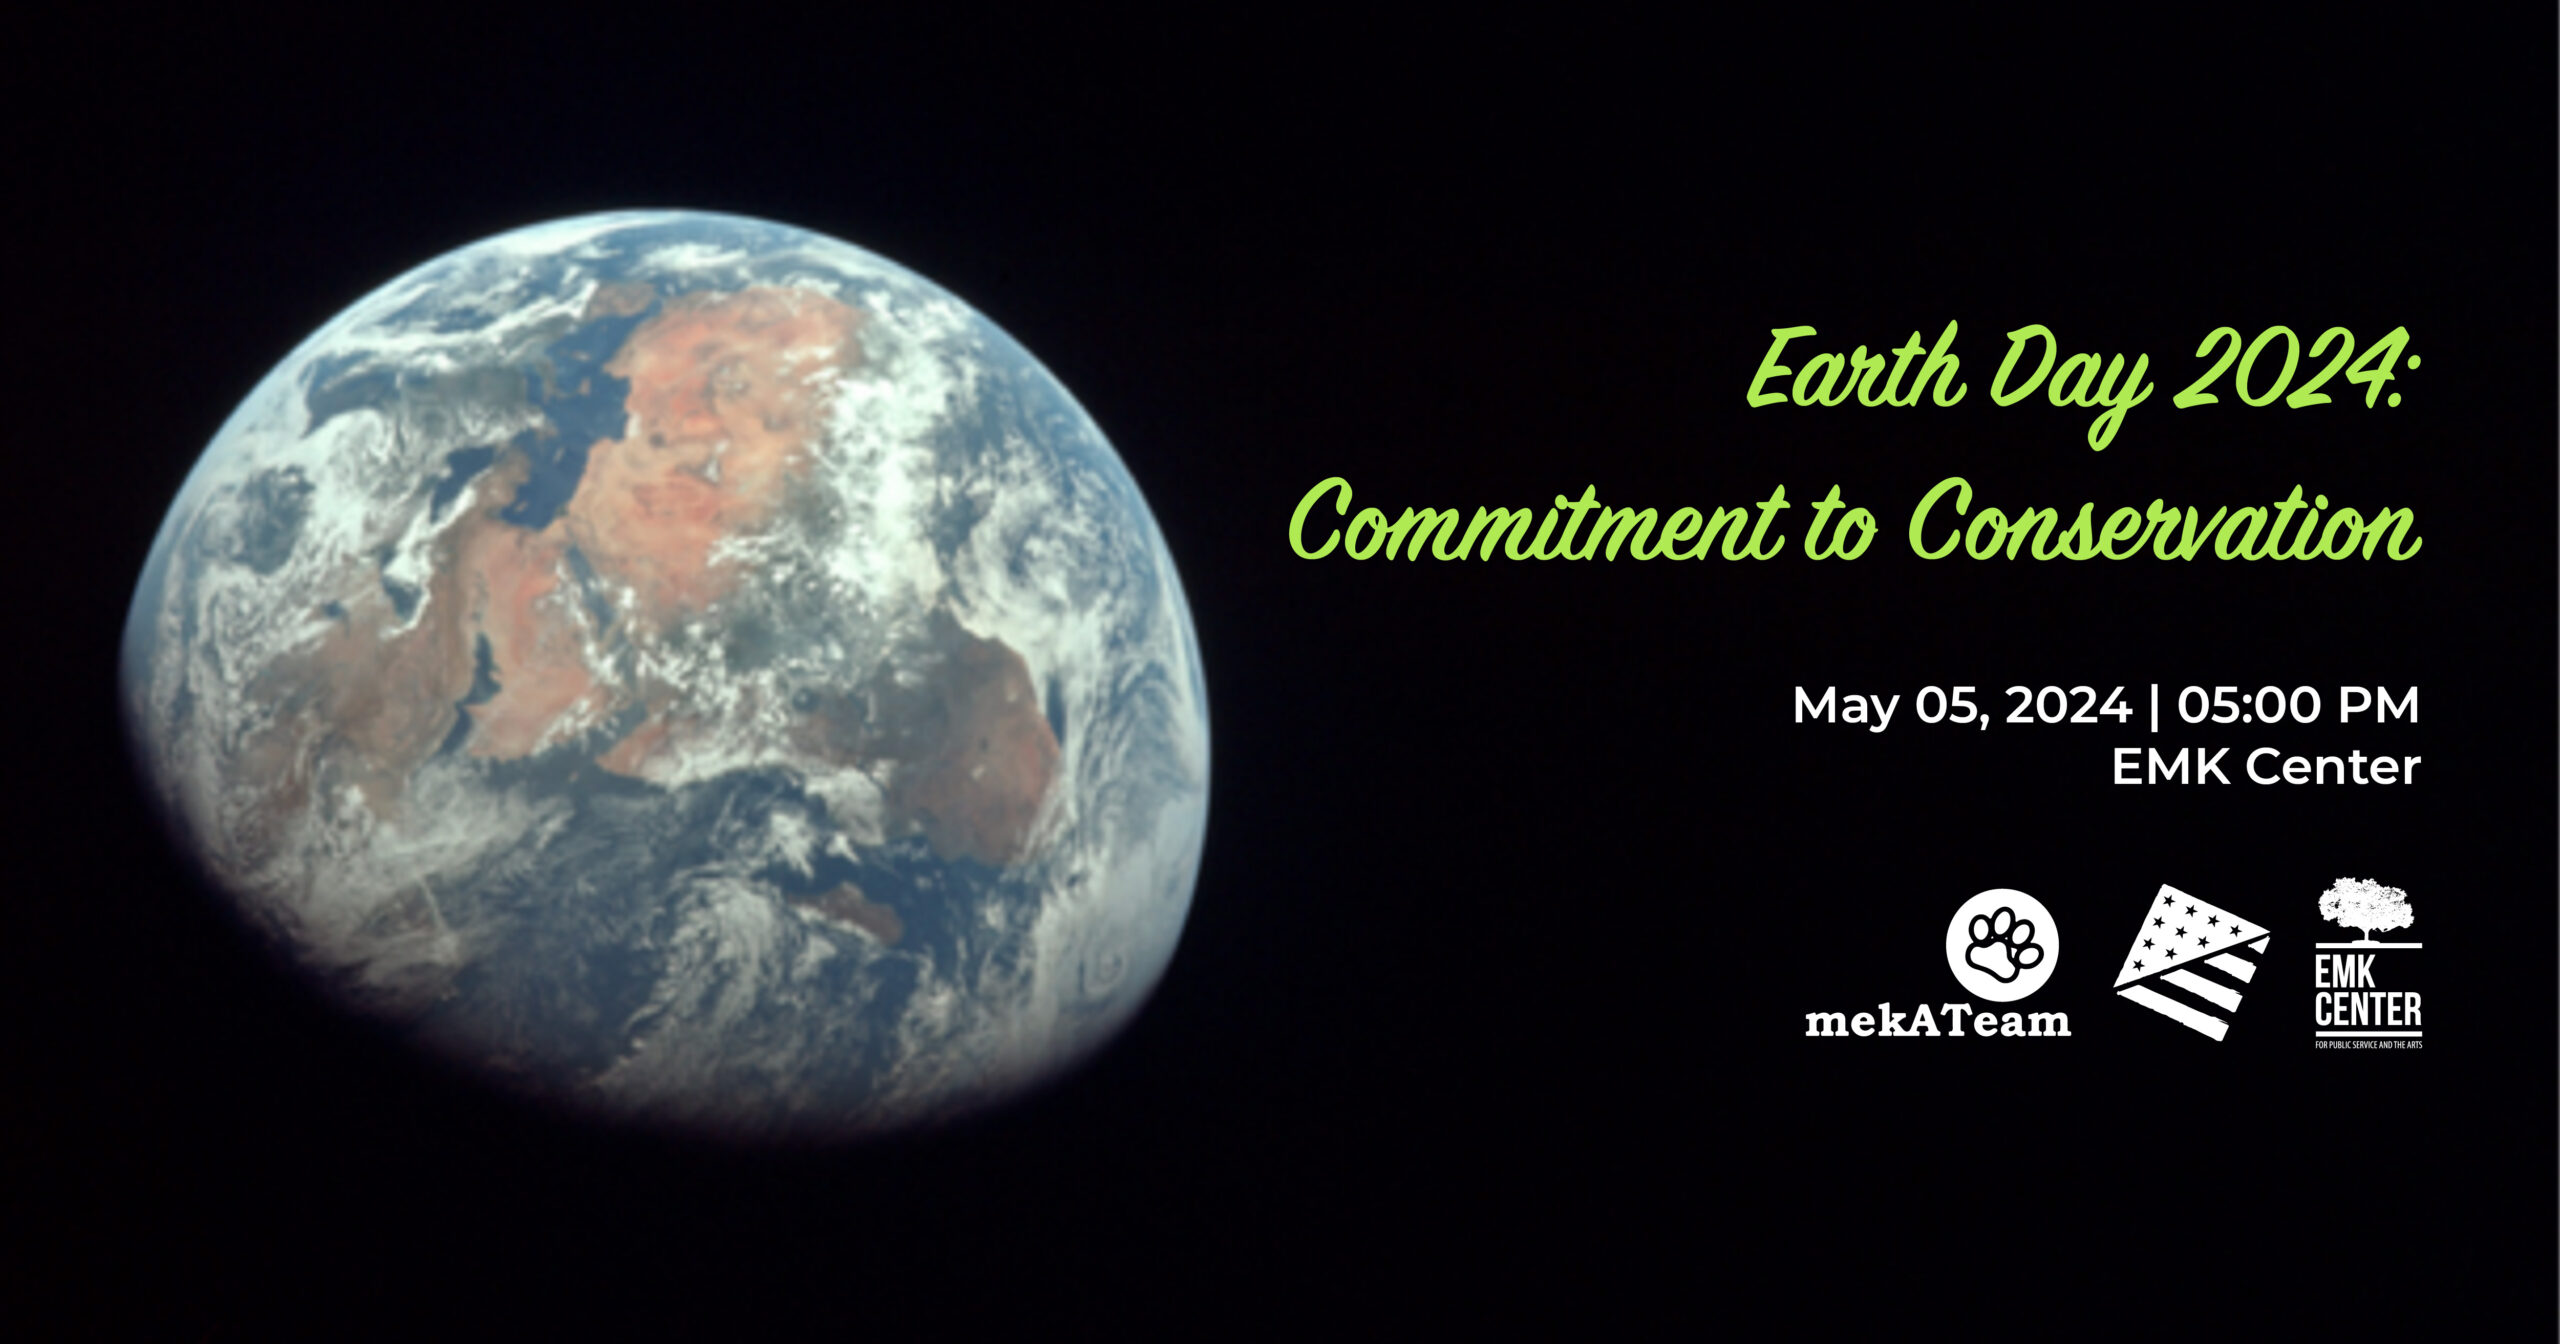 Earth Day 2024: Commitment to Conservation